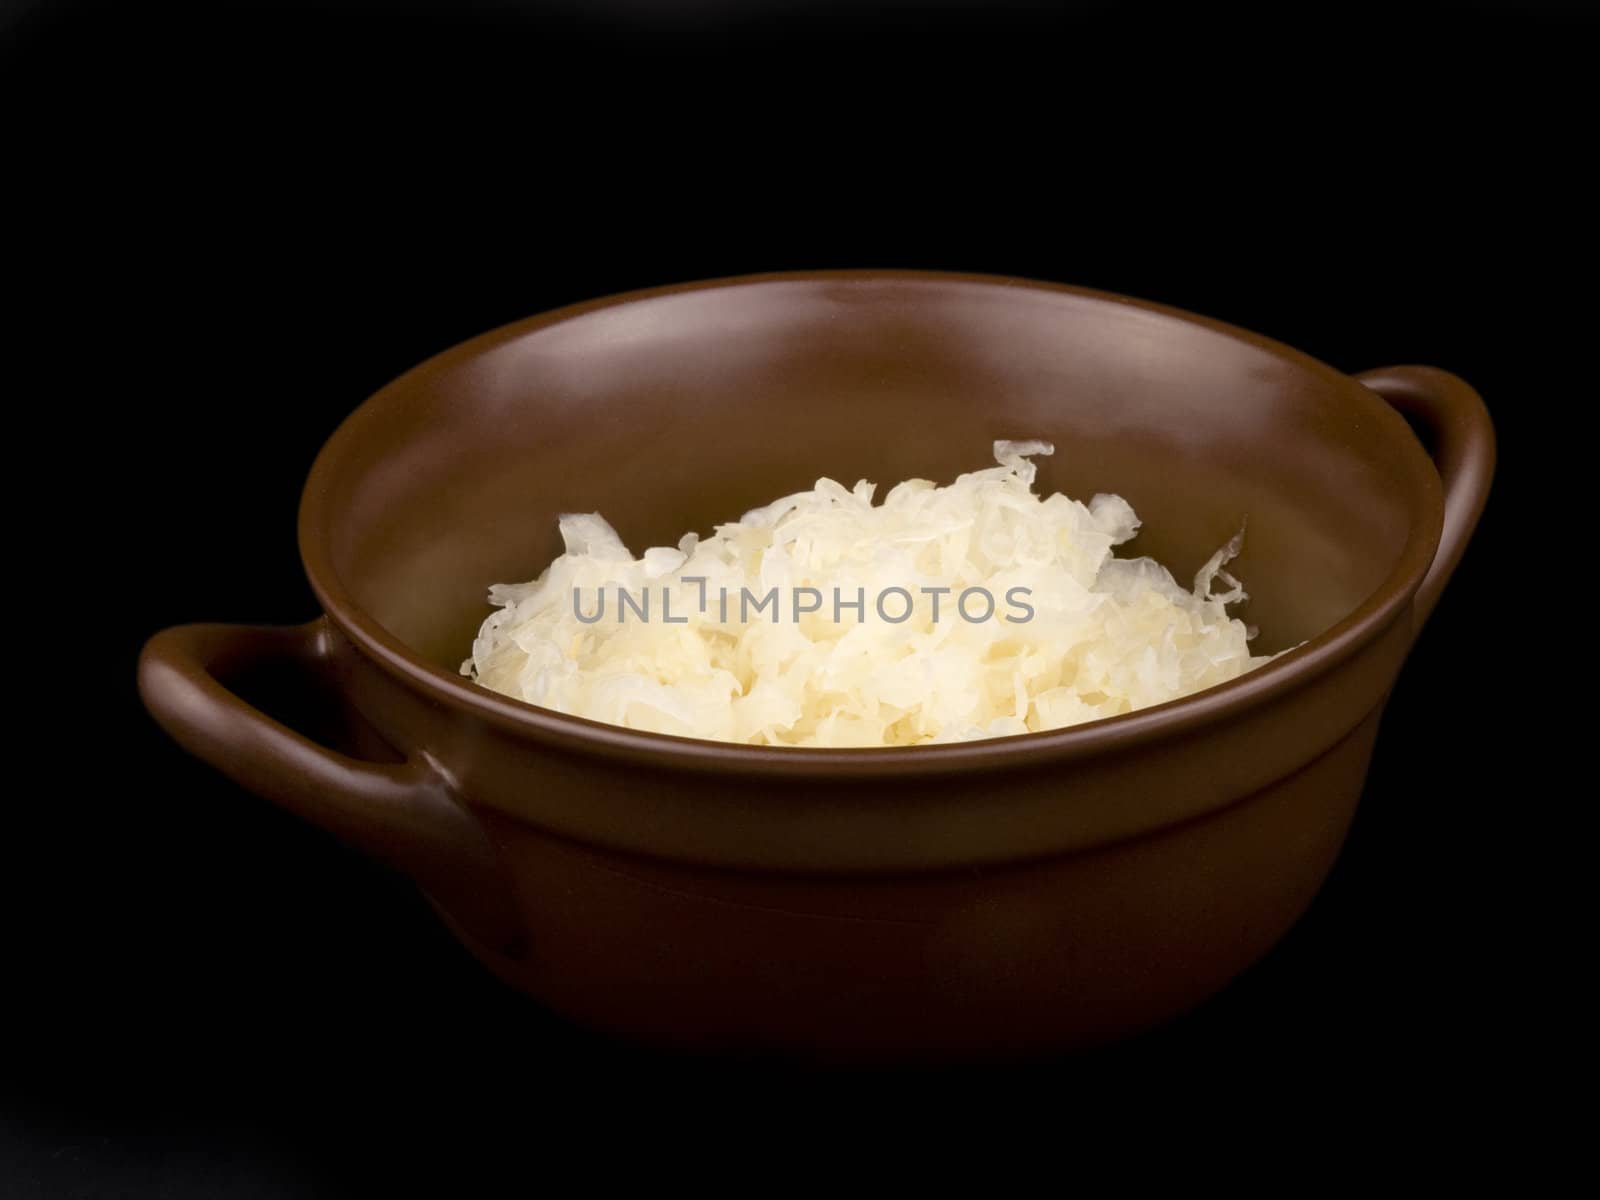 Ceramic bowl filled with sour cabbage on black background